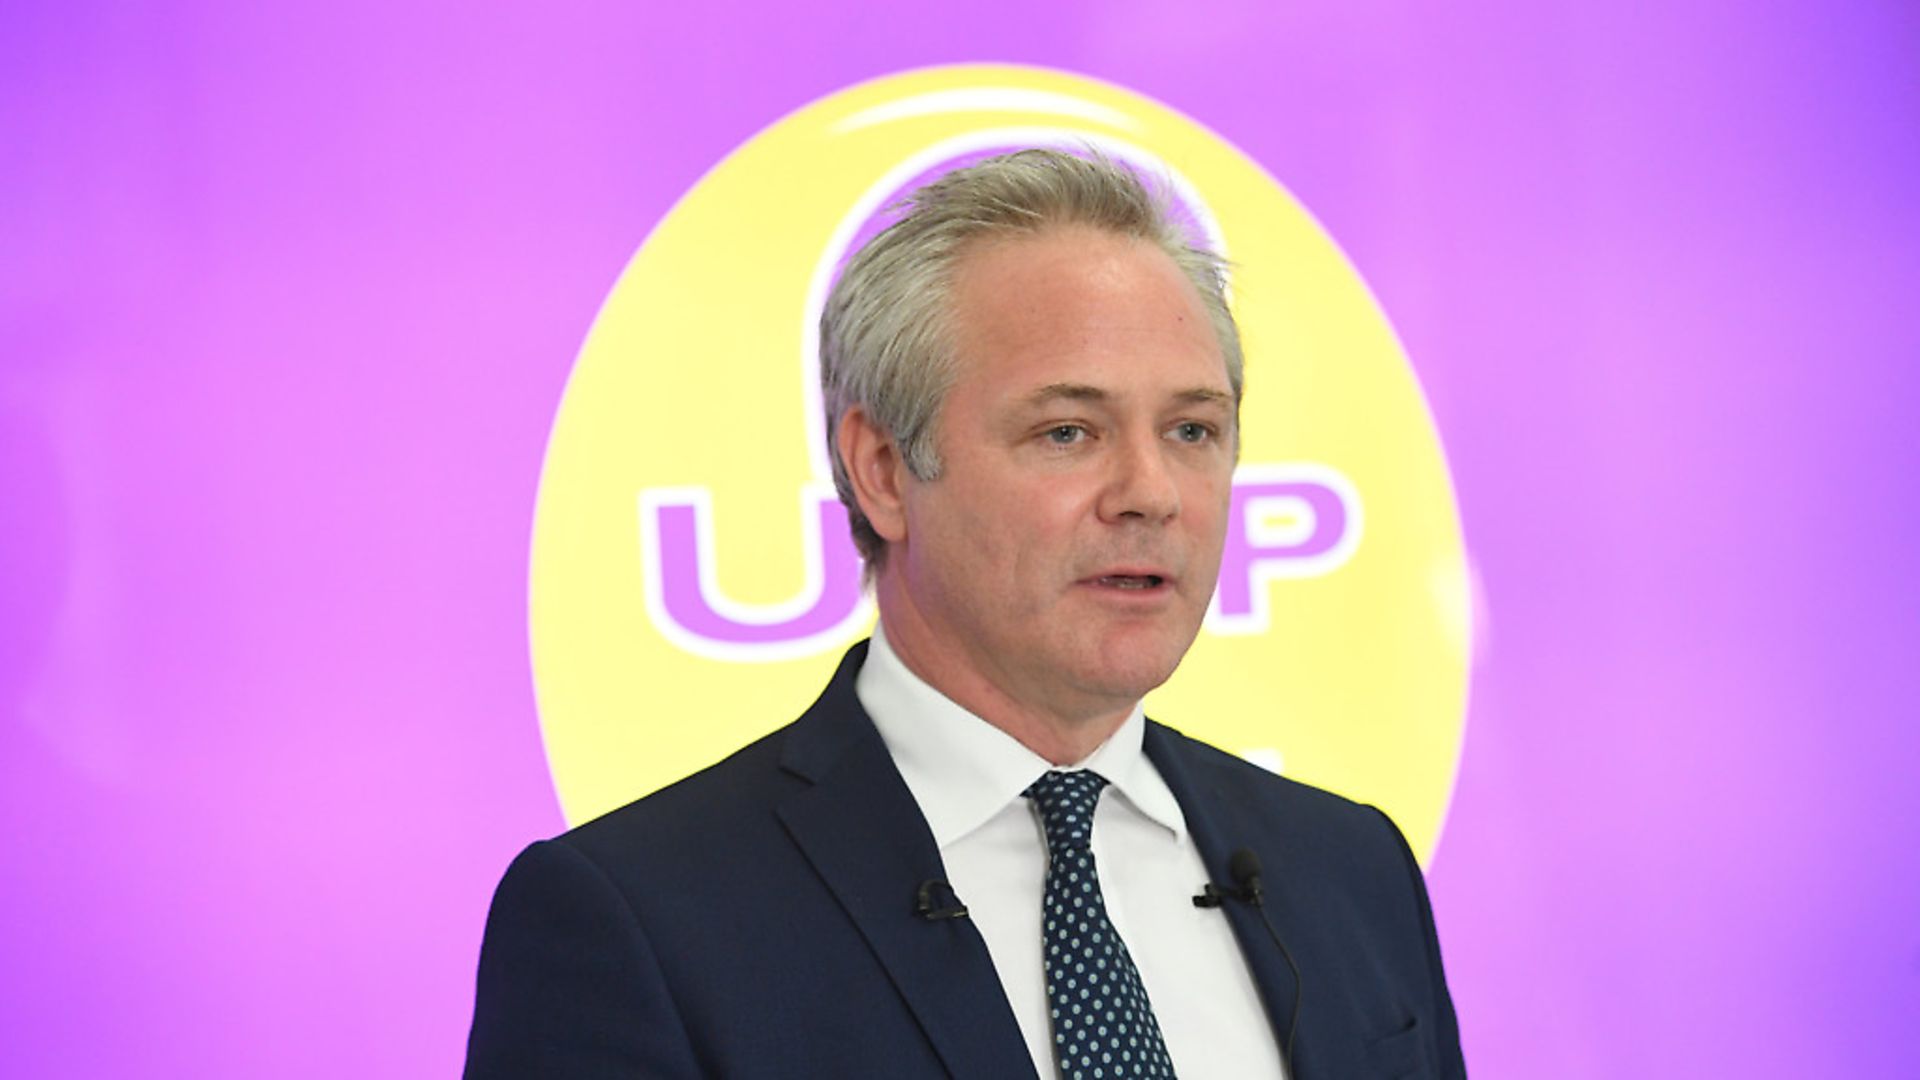 UKIP leader Richard Braine plans to boycott his own conference because the party has not sold enough tickets. Picture: Stefan Rousseau/PA Wire/PA Images - Credit: PA Wire/PA Images